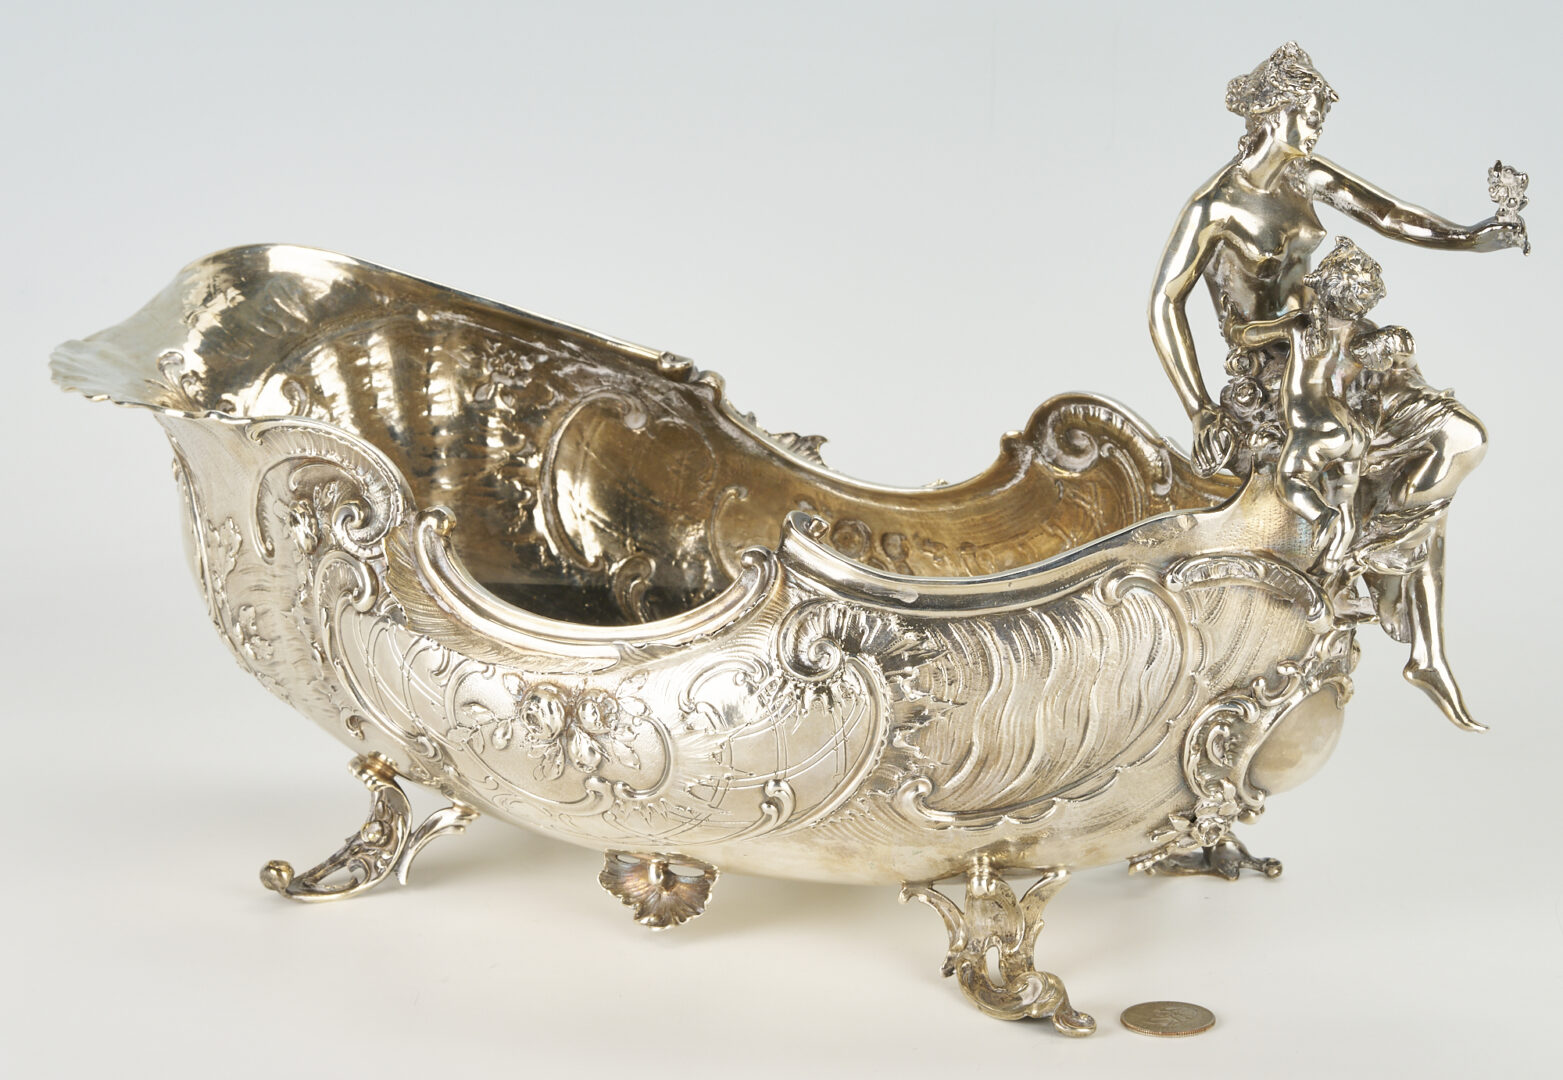 Lot 40: Continental Figural Silver Centerpiece or Serving Bowl